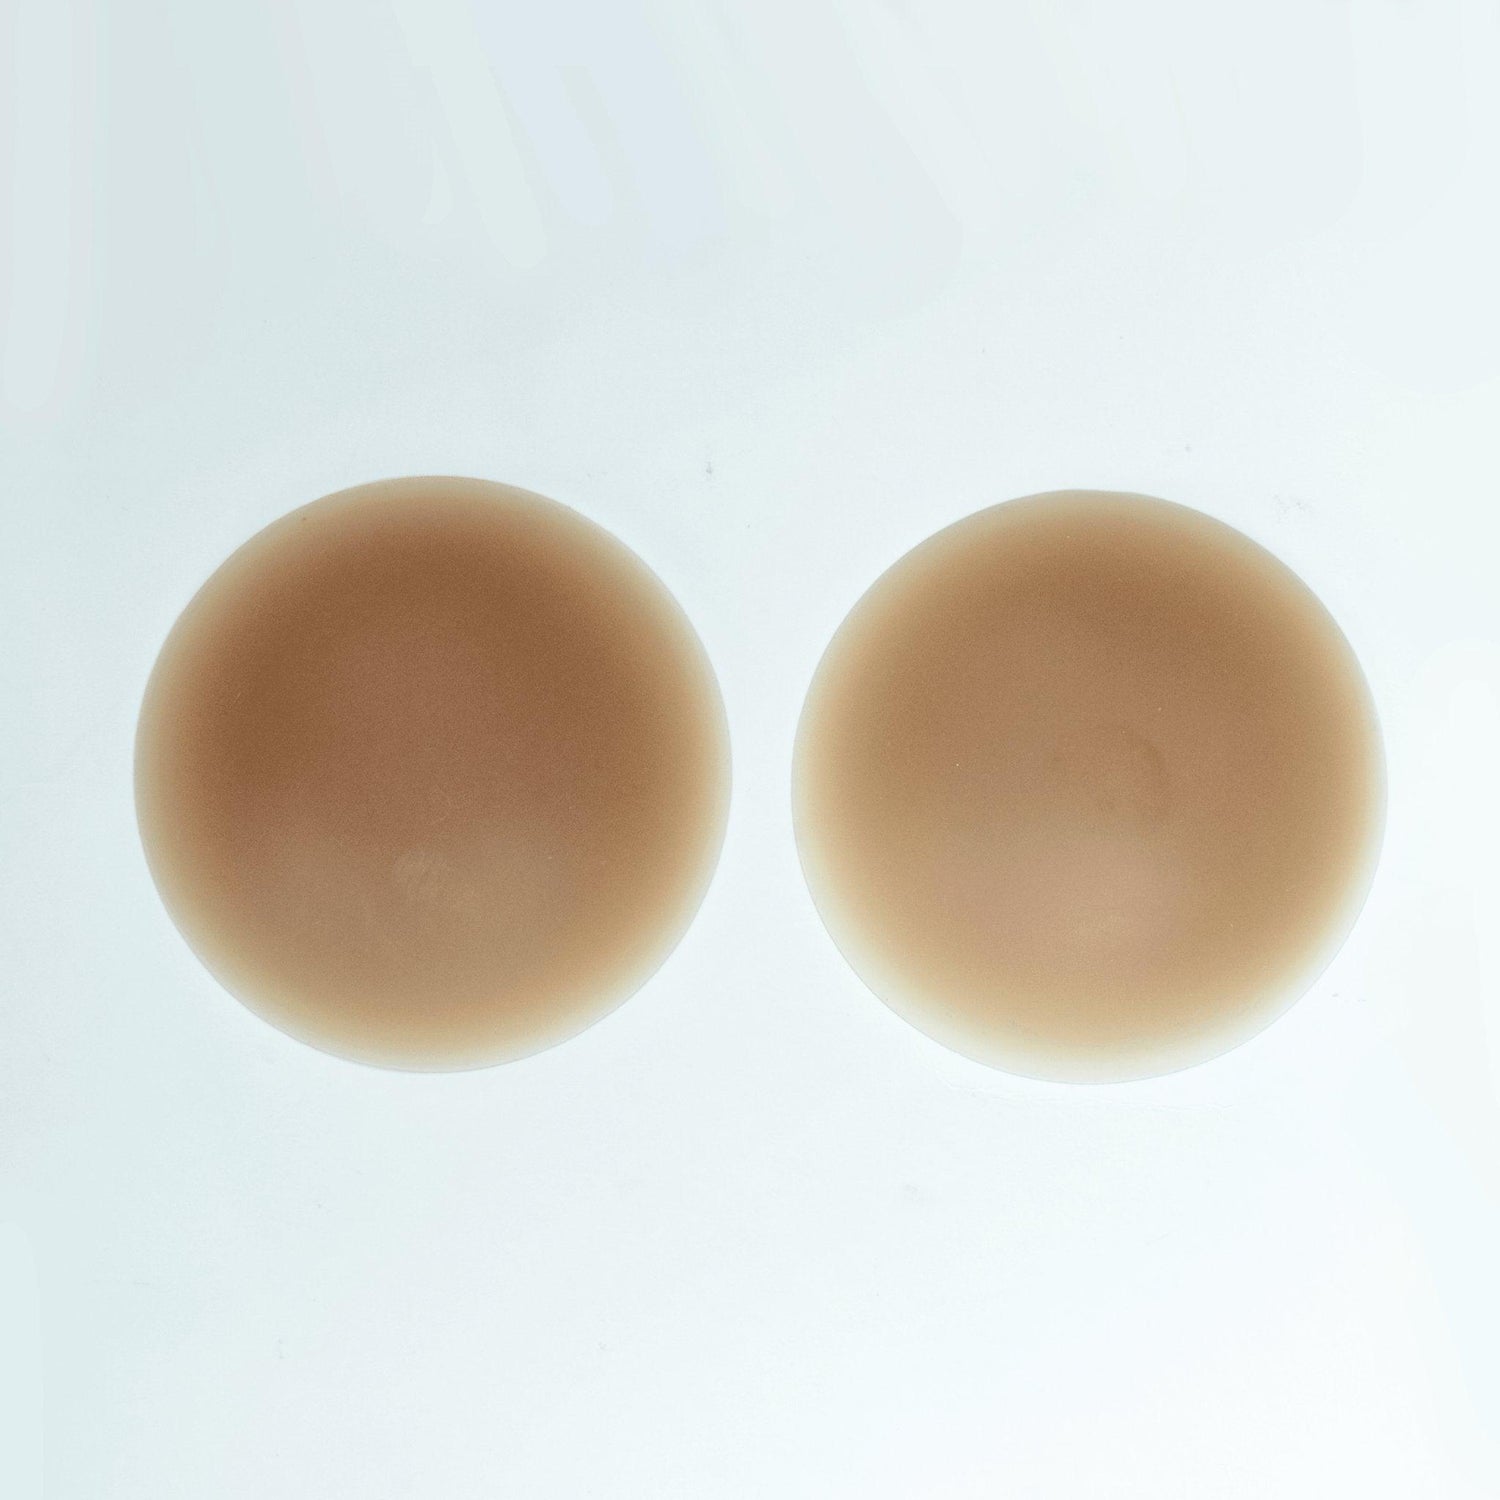 Silicone Nipple Covers - A-DD Sizes - Matte Finish - Compact Travel Package